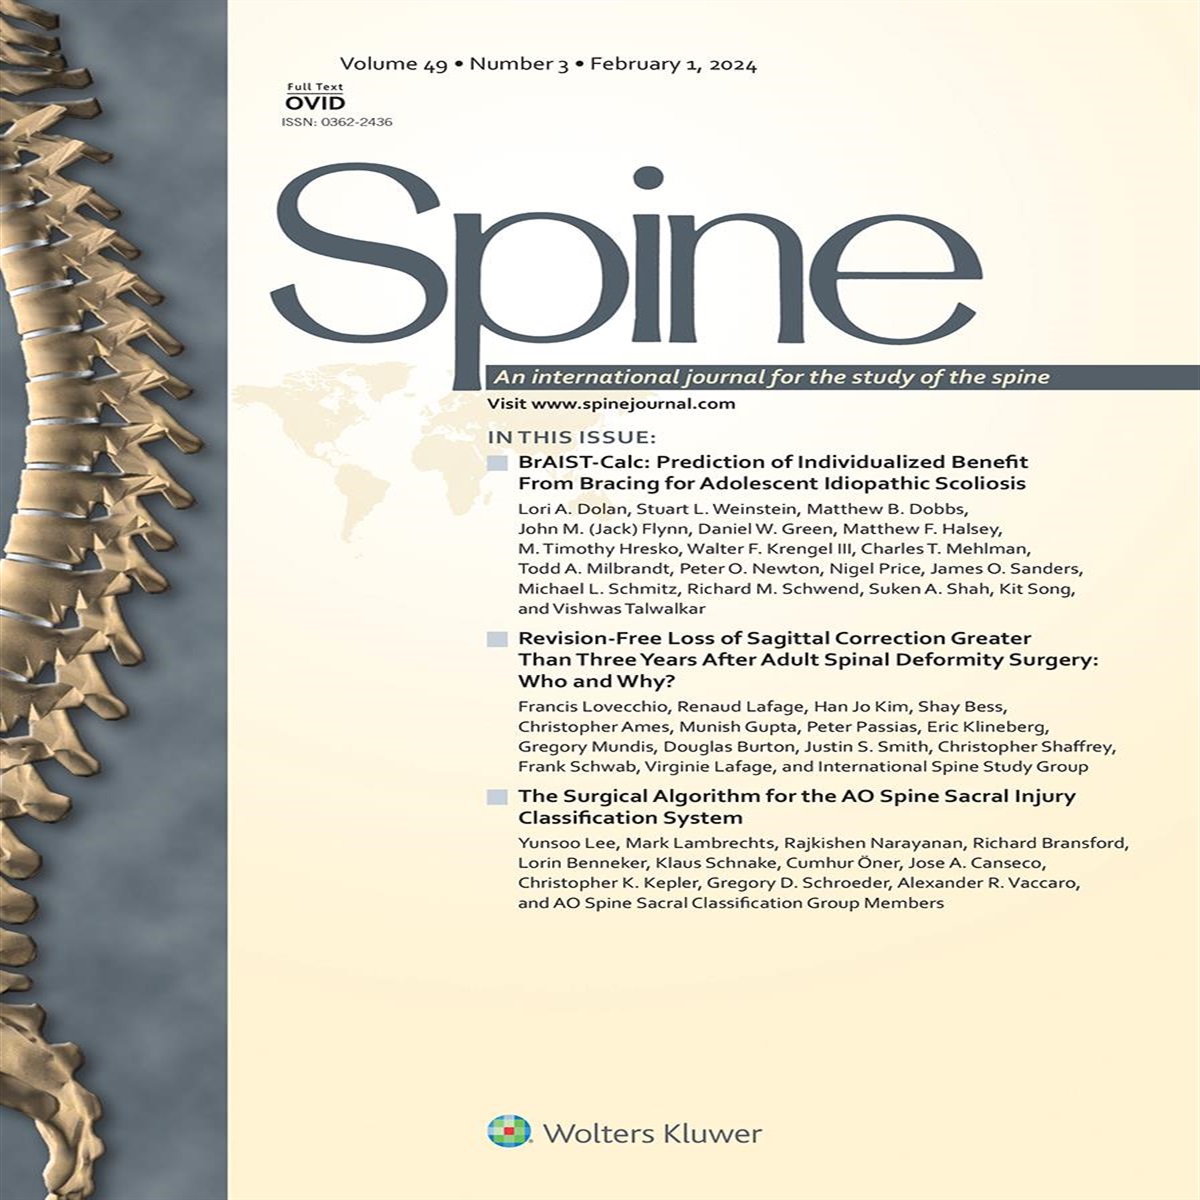 Directed Versus Nondirected Standing Postures in Adolescent Idiopathic Scoliosis: Its Impact on Curve Magnitude, Alignment, and Clinical Decision-Making: Erratum